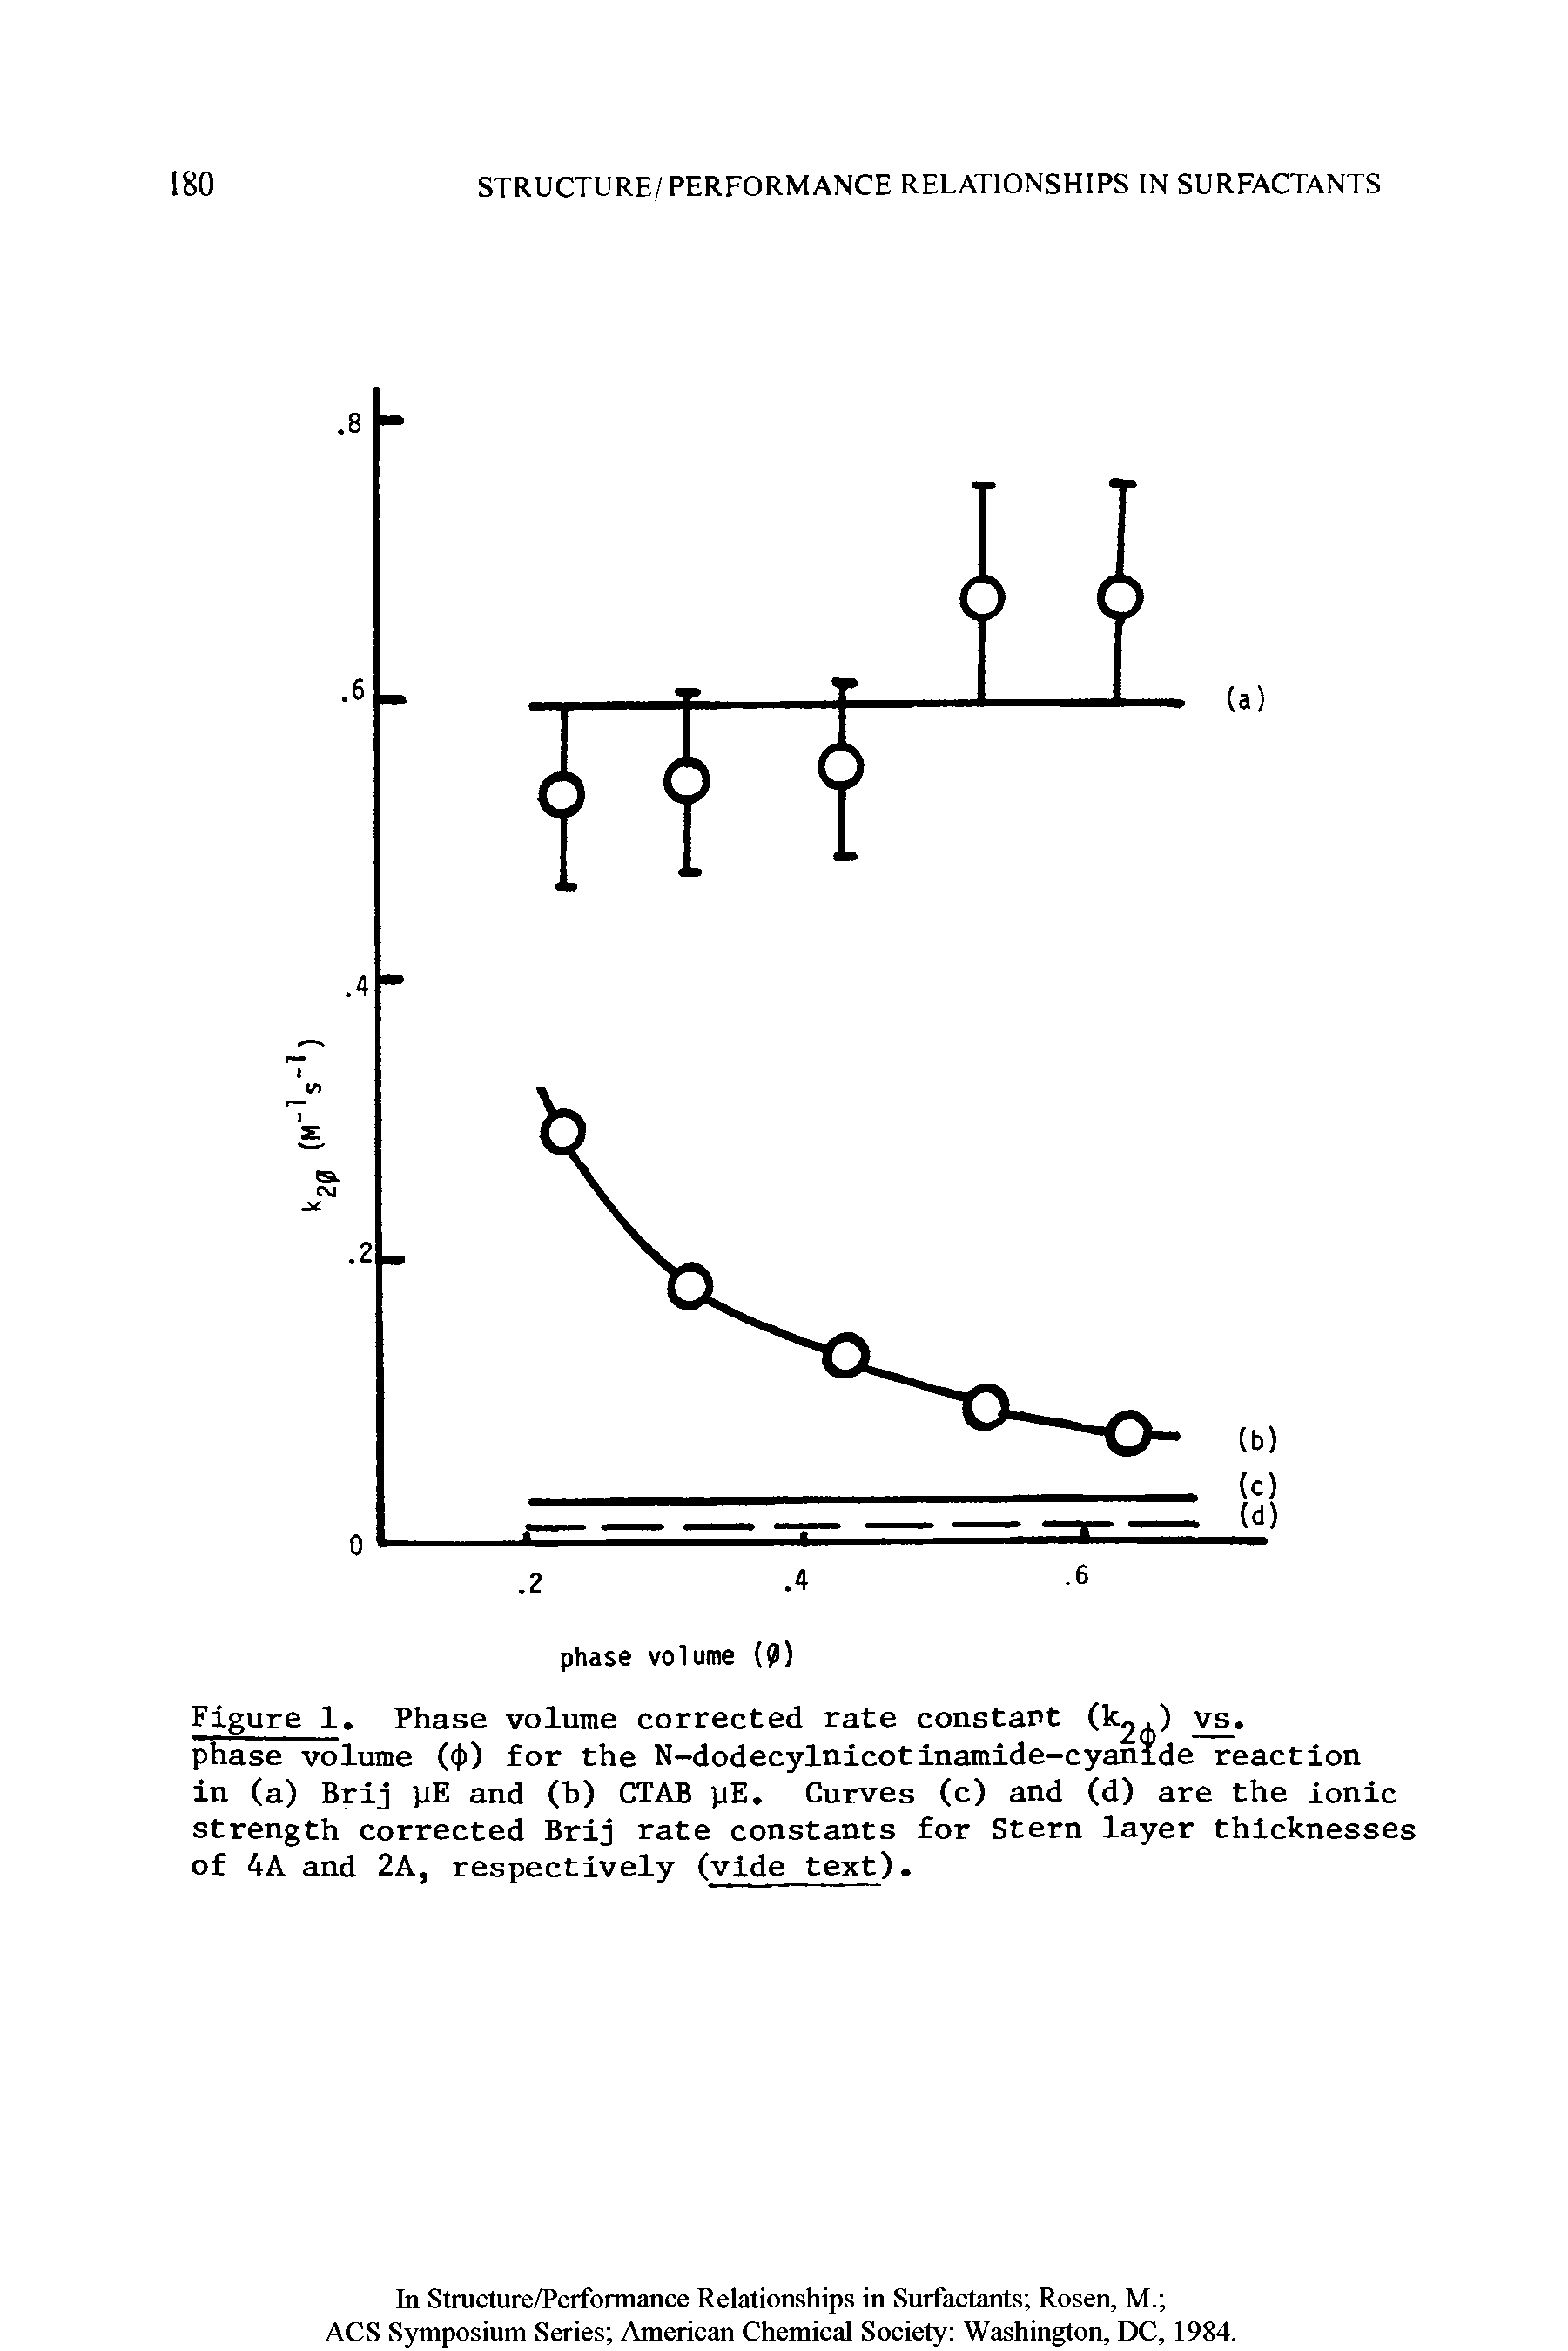 Figure 1. Phase volume corrected rate constant (ko ) phase volume ((f)) for the N-dodecylnicotinamide-cyanide reaction in (a) Brlj yE and (b) CTAB yE, Curves (c) and (d) are the ionic strength corrected Brij rate constants for Stern layer thicknesses of 4A and 2A, respectively (vide text).